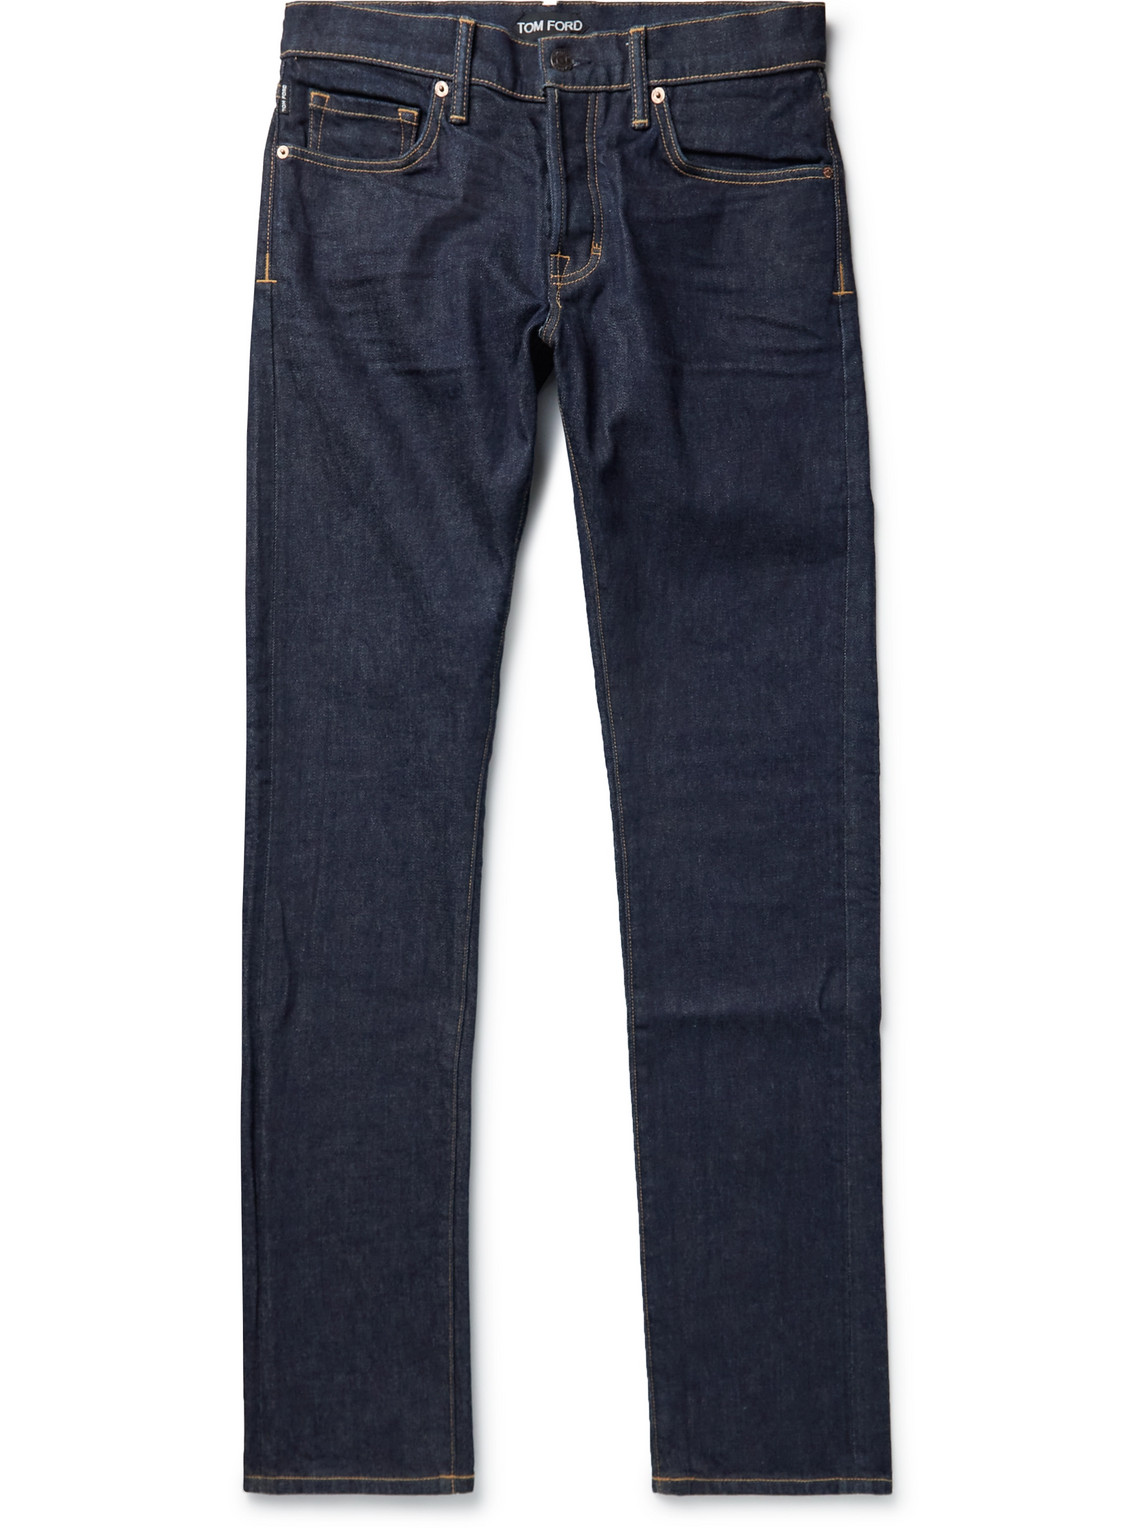 Tom Ford Slim Fit Stretch Japanese Selvedge Jeans In Blue